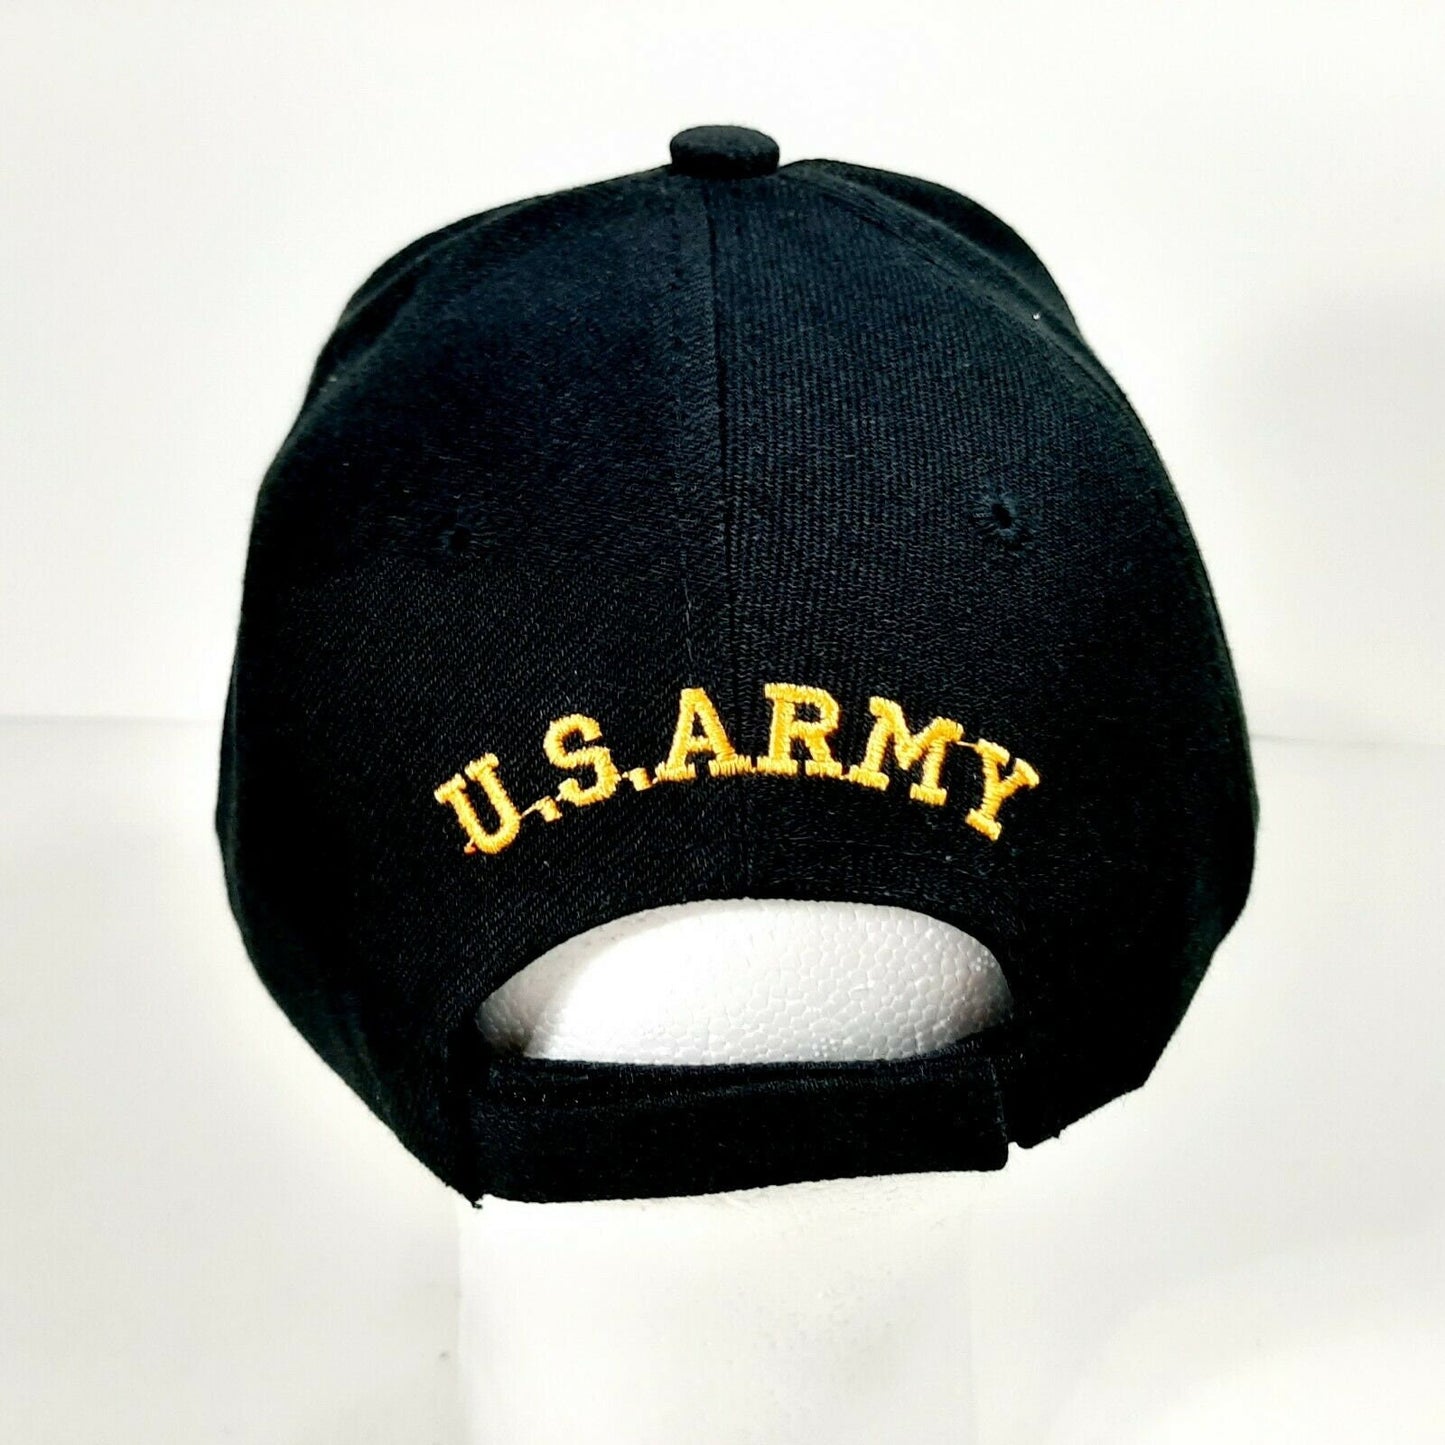 US Army Sergeant Men's Ball Cap Hat Black Embroidered Acrylic